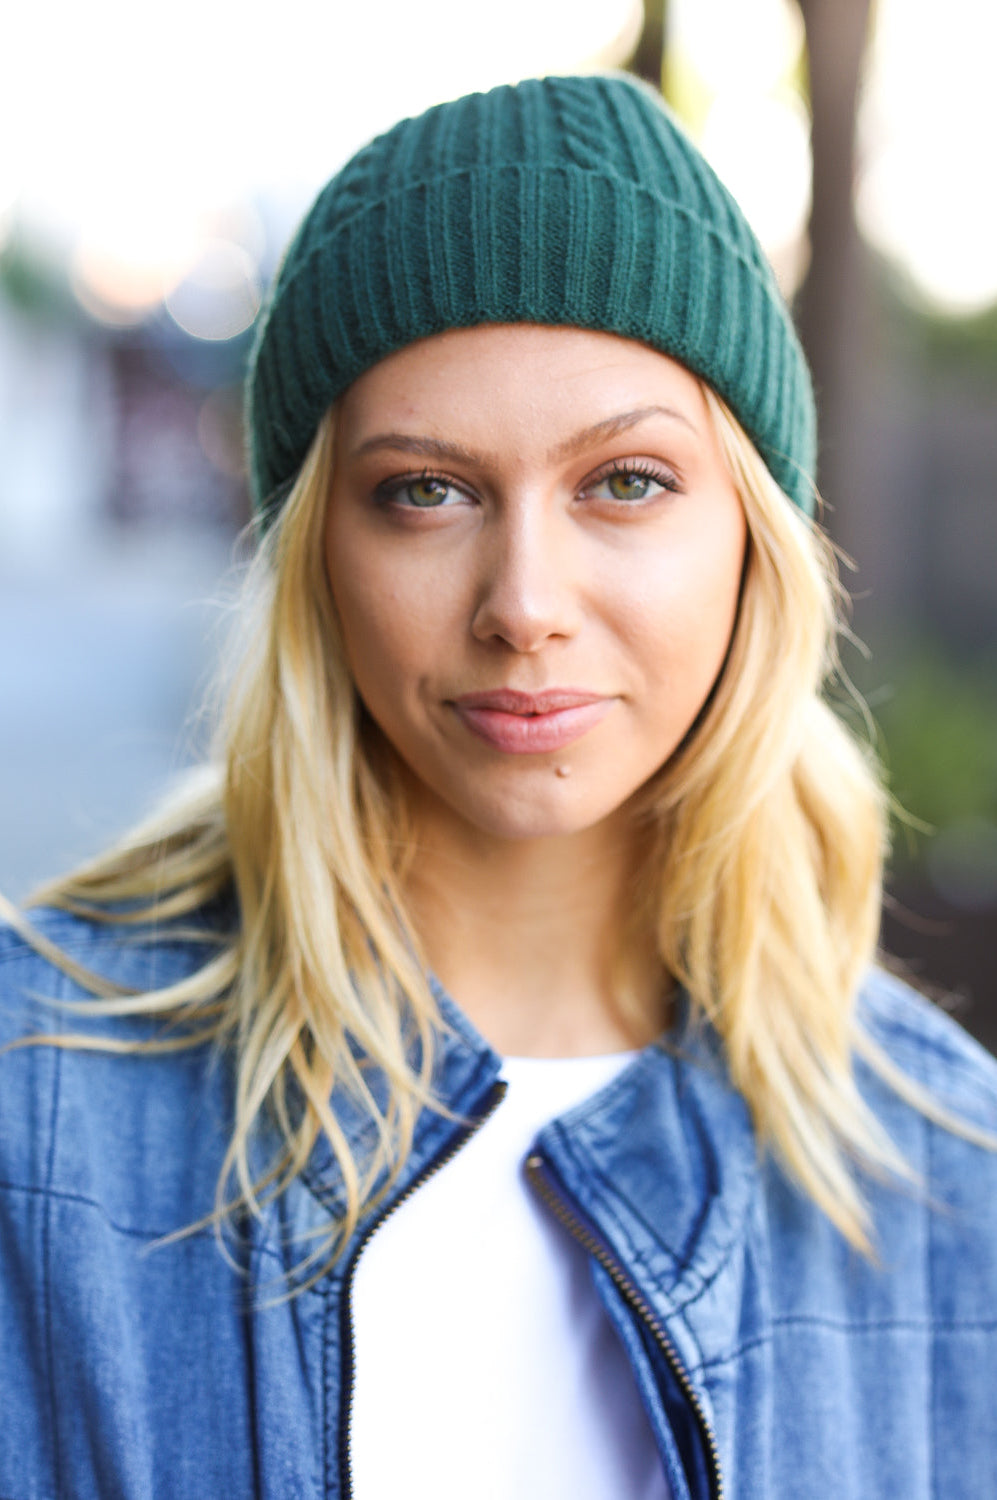 Let's Go Emerald Green Cable Knit Beanie ICON